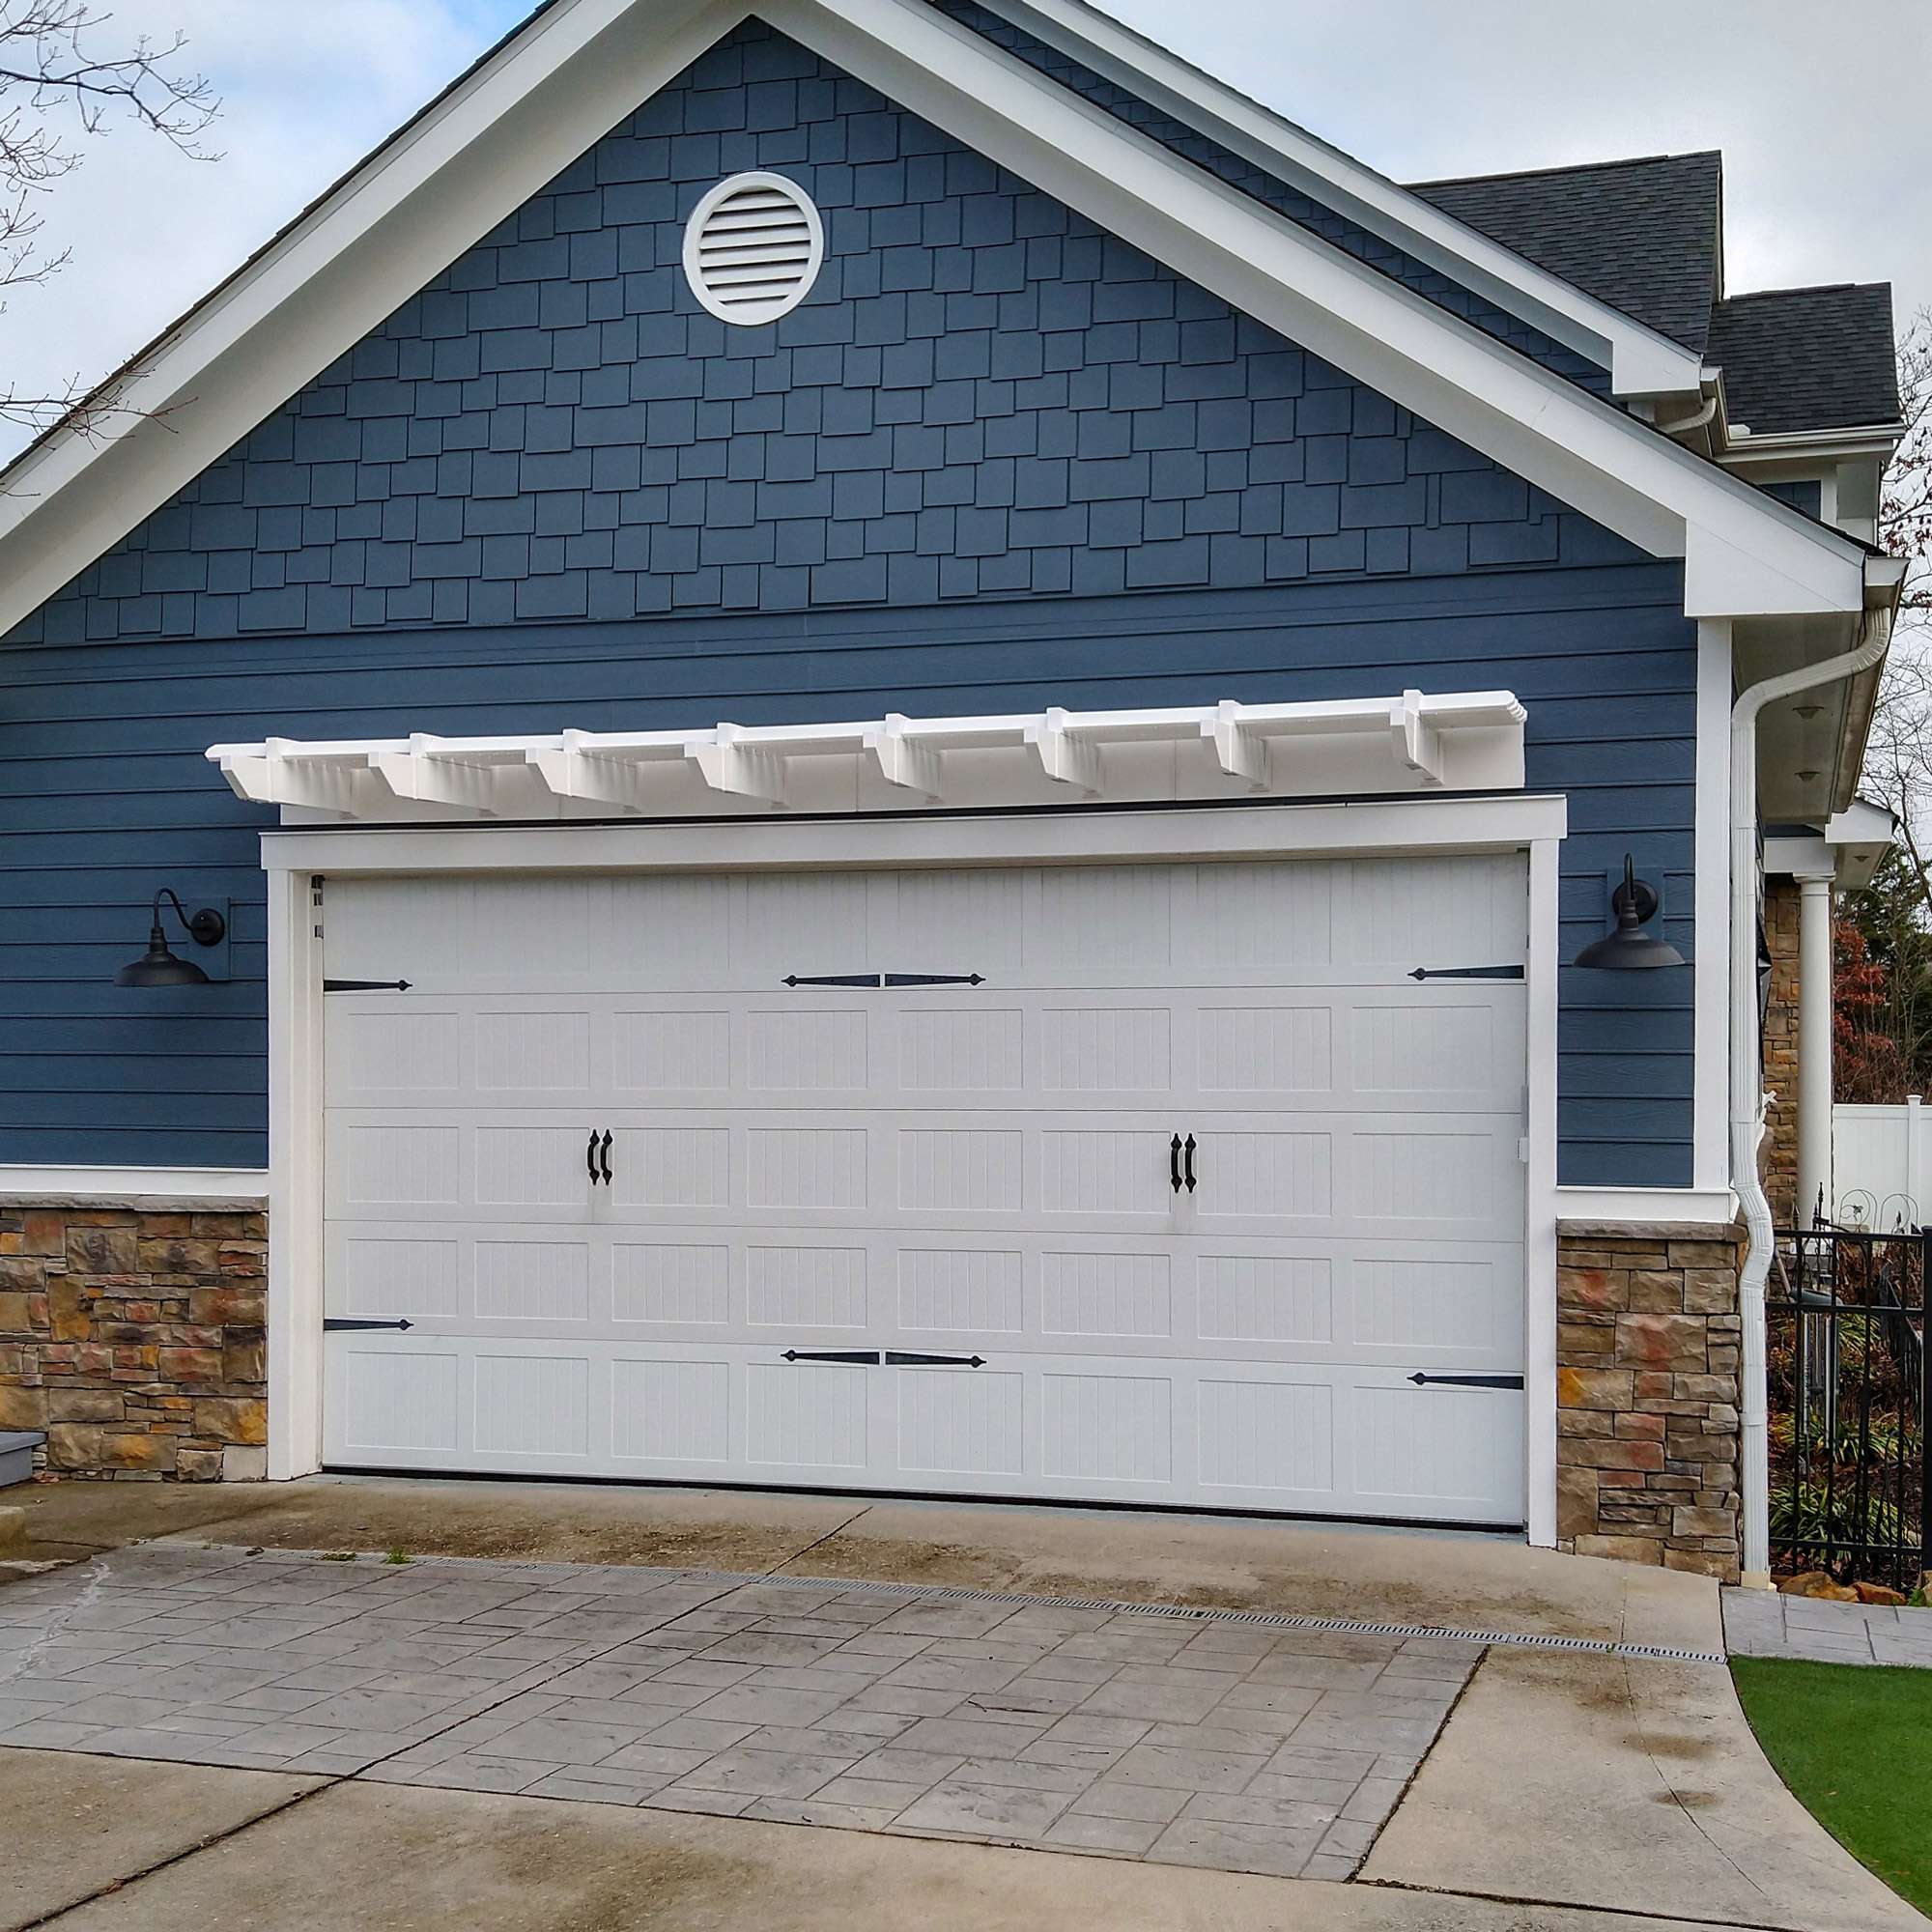 White attached wall pergola above double garage door on blue house